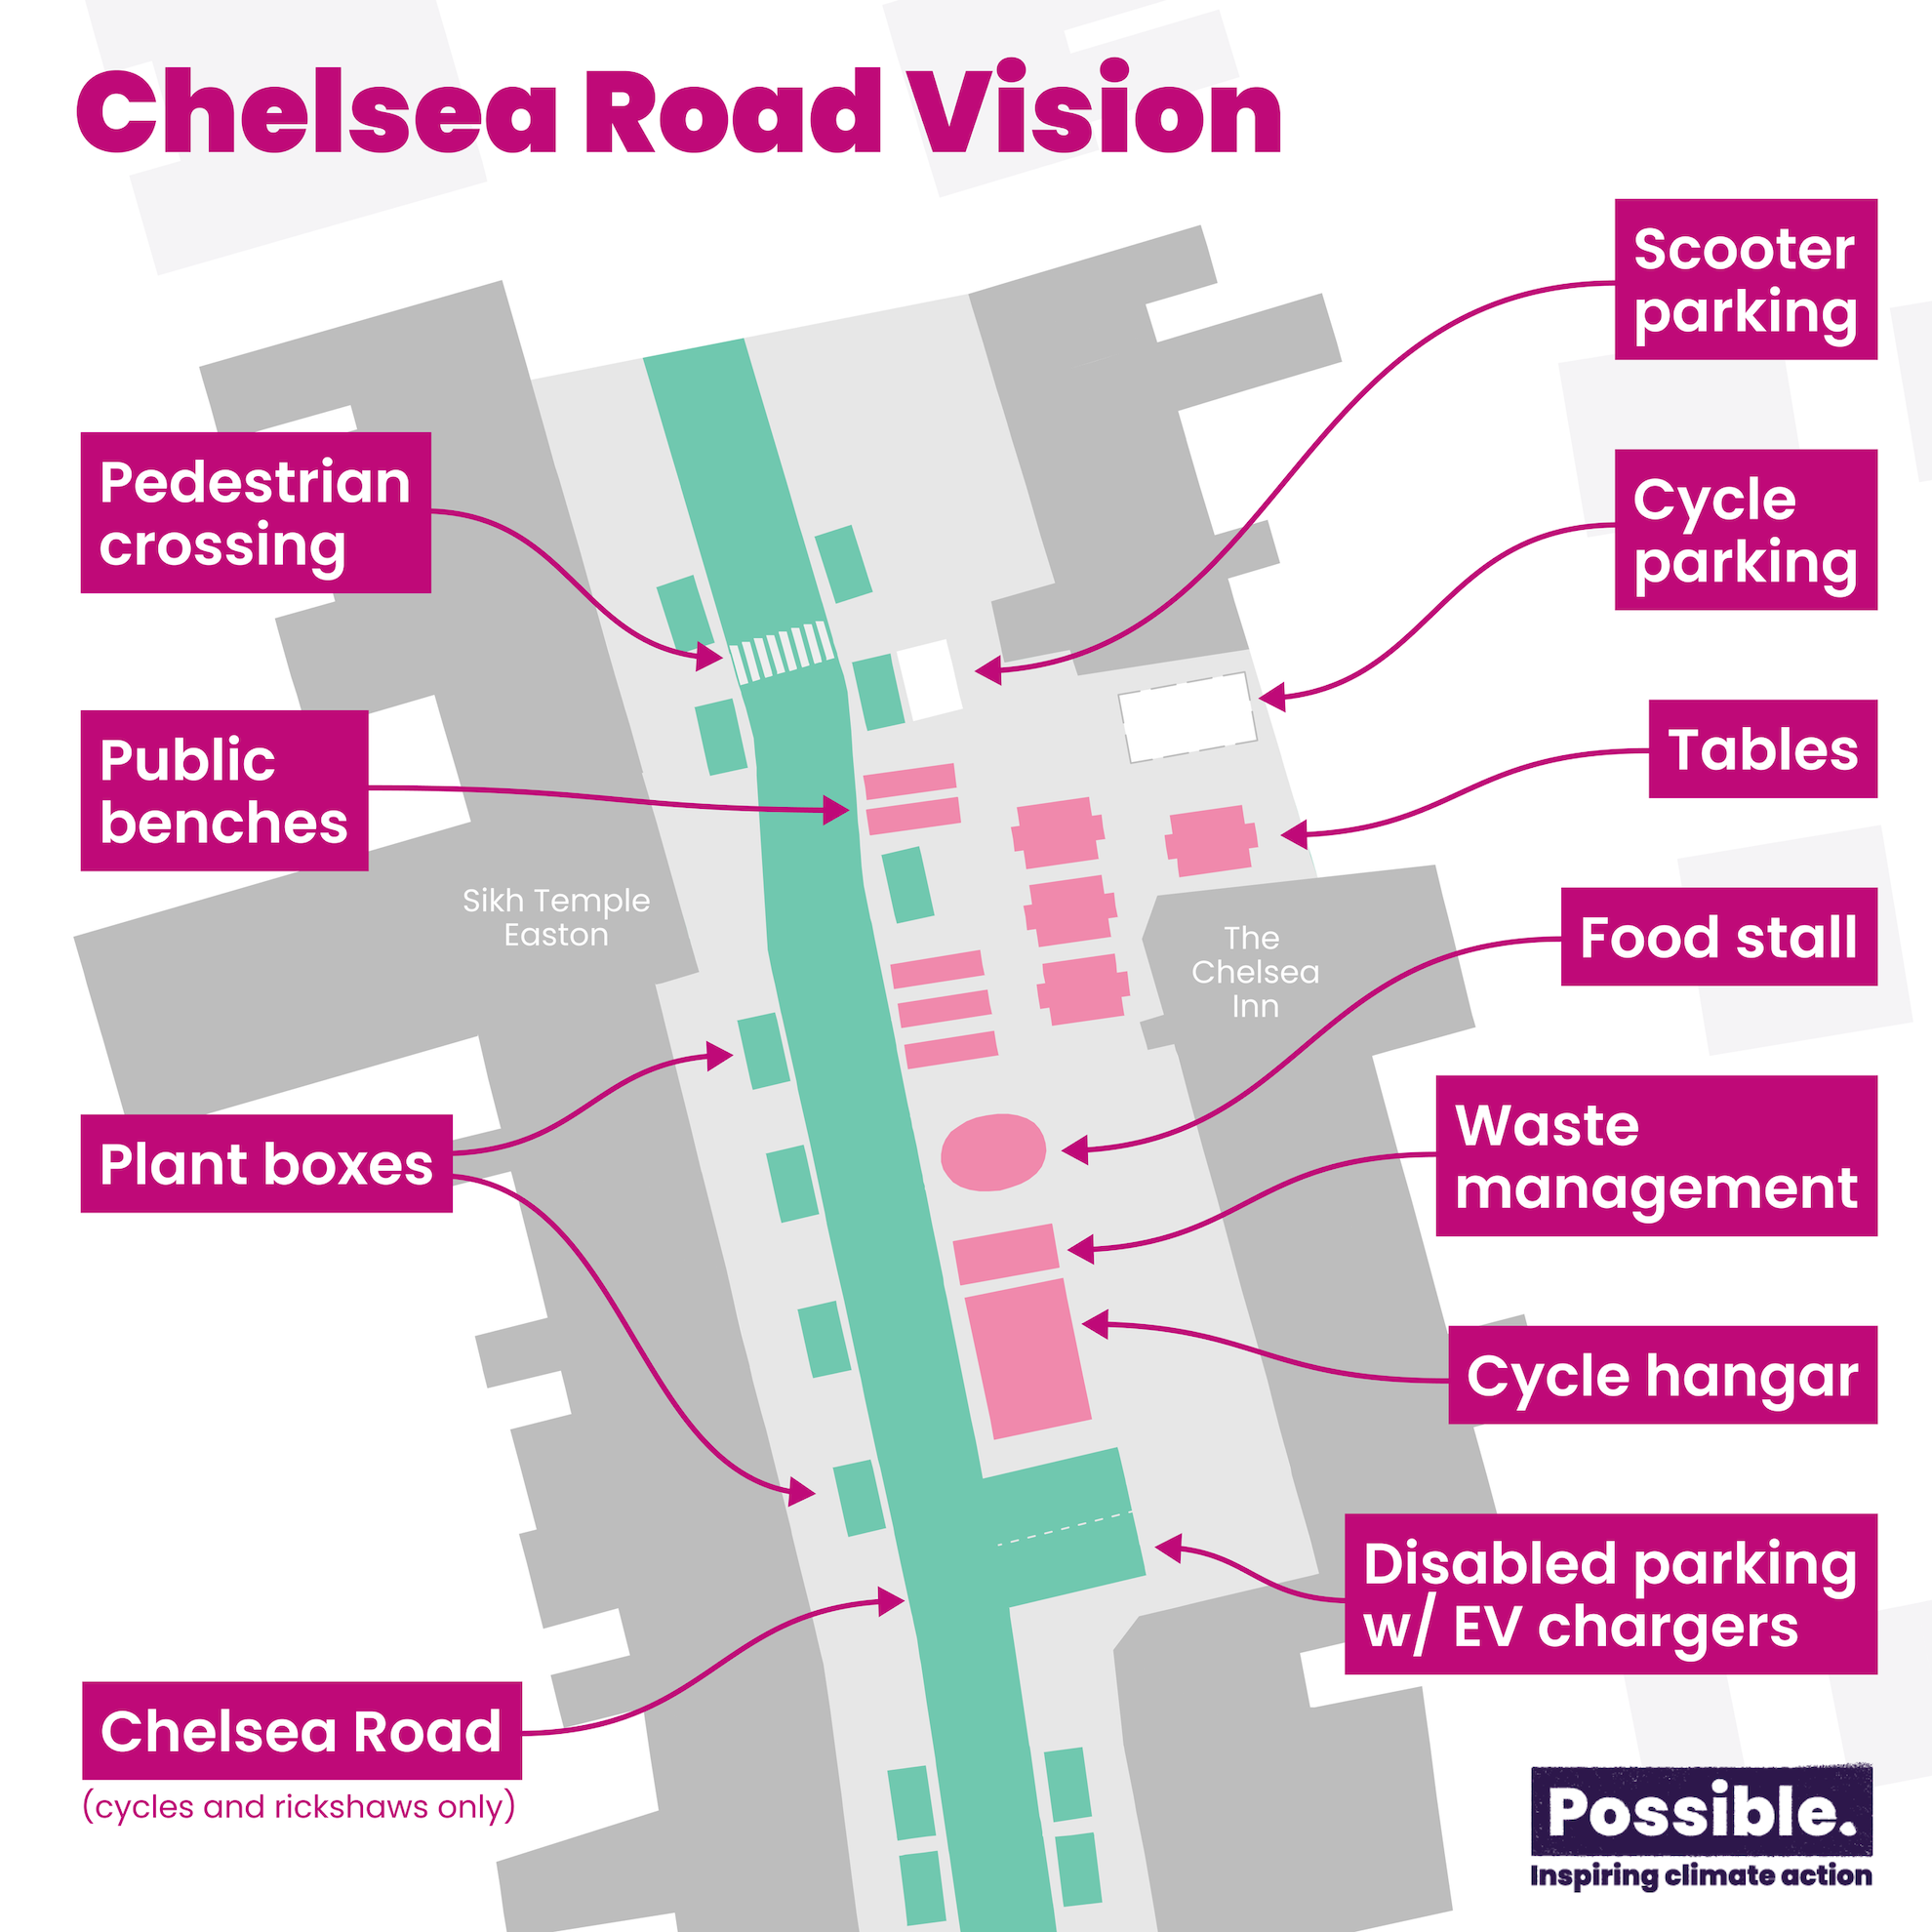 Vision of Chelsea Road by Possible